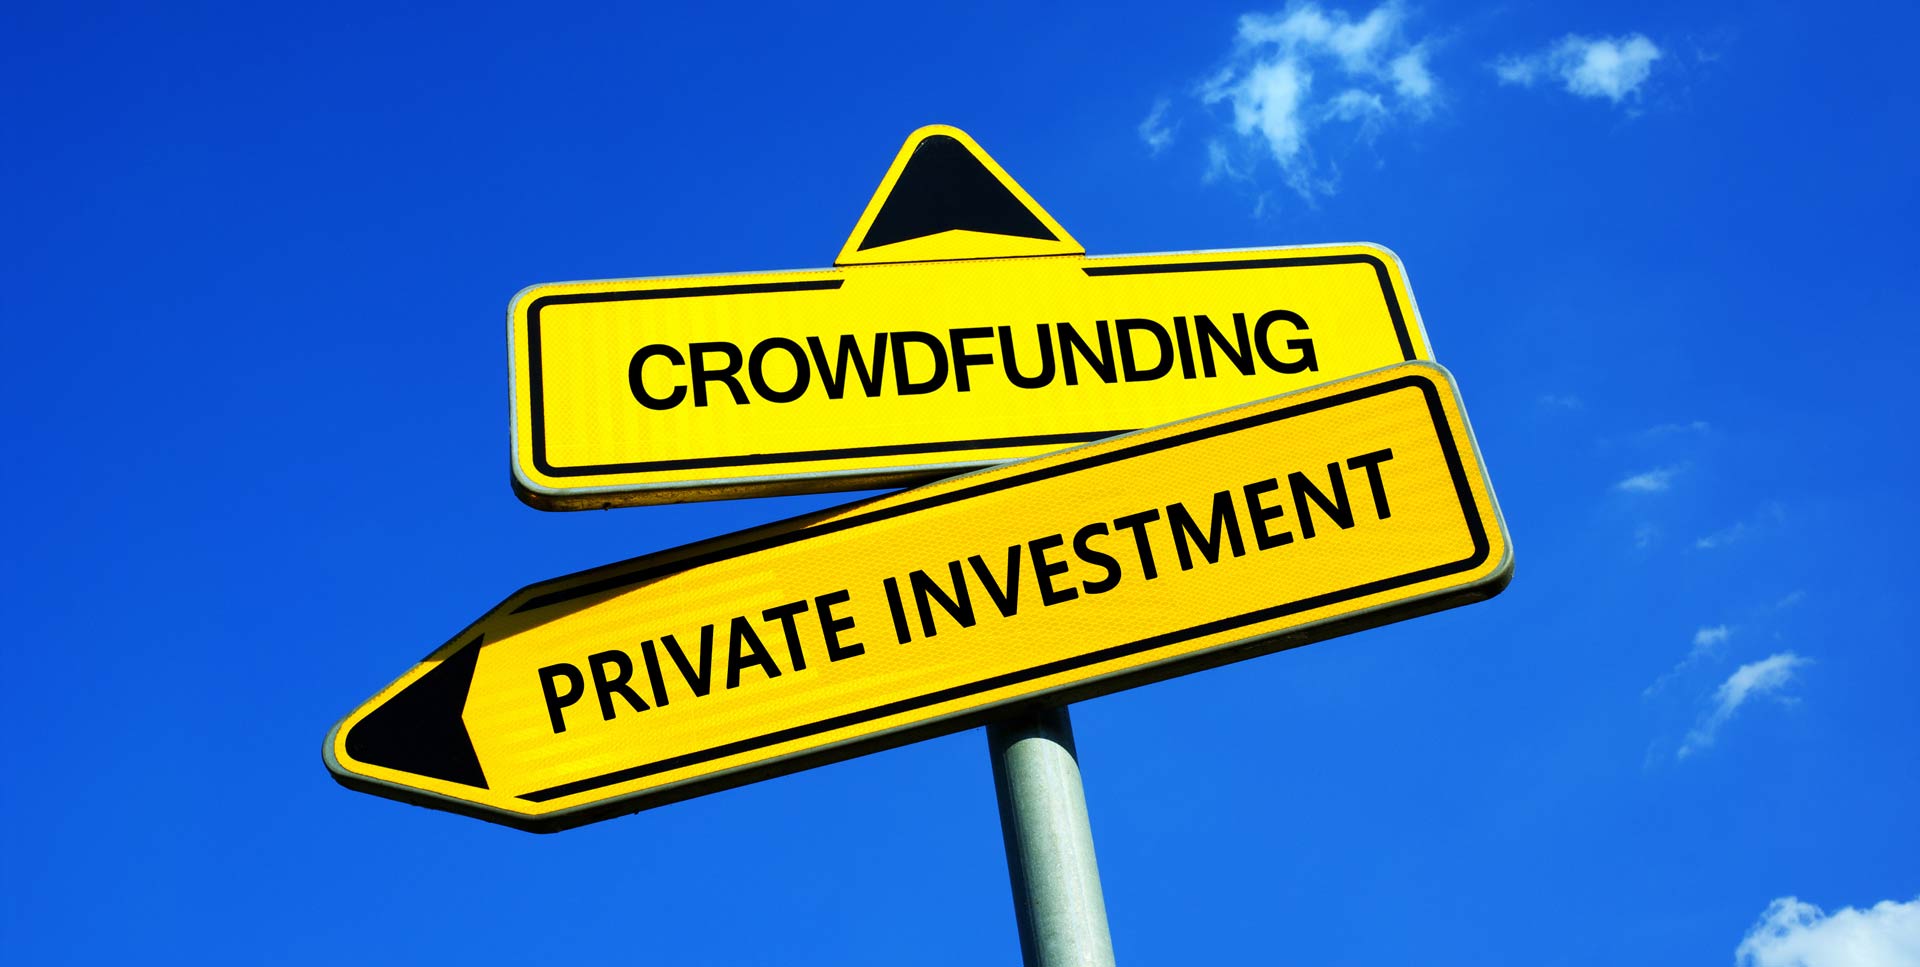 5 benefits of crowdfunding over private investment